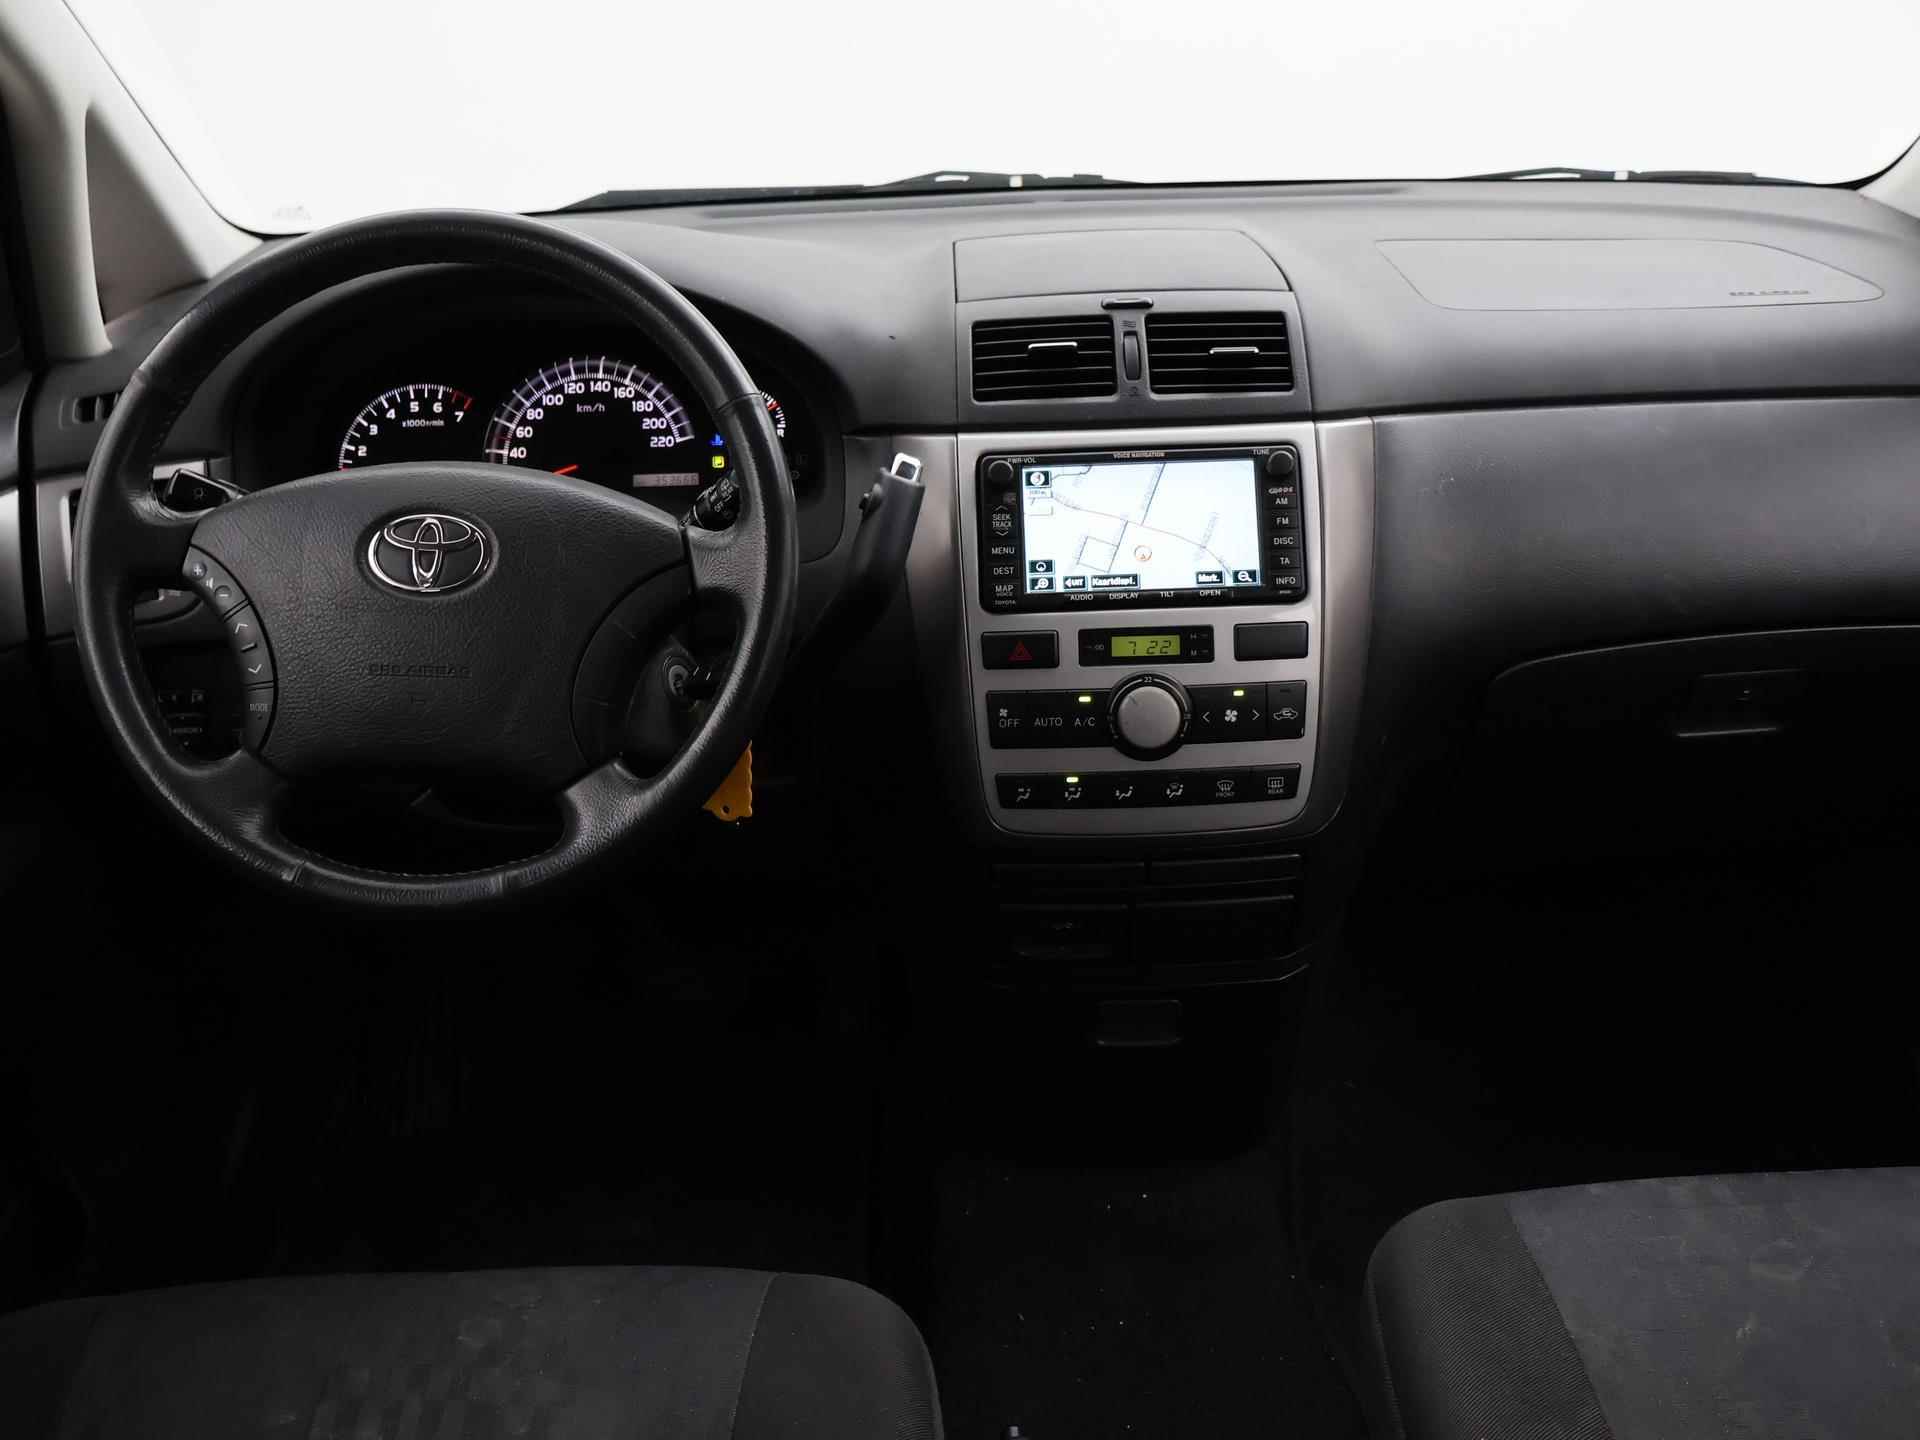 Toyota Avensis Verso 2.0i AUTOMAAT 7-PERSOONS + NAVIGATIE / CAMERA / CLIMATE CONTROL - 4/29